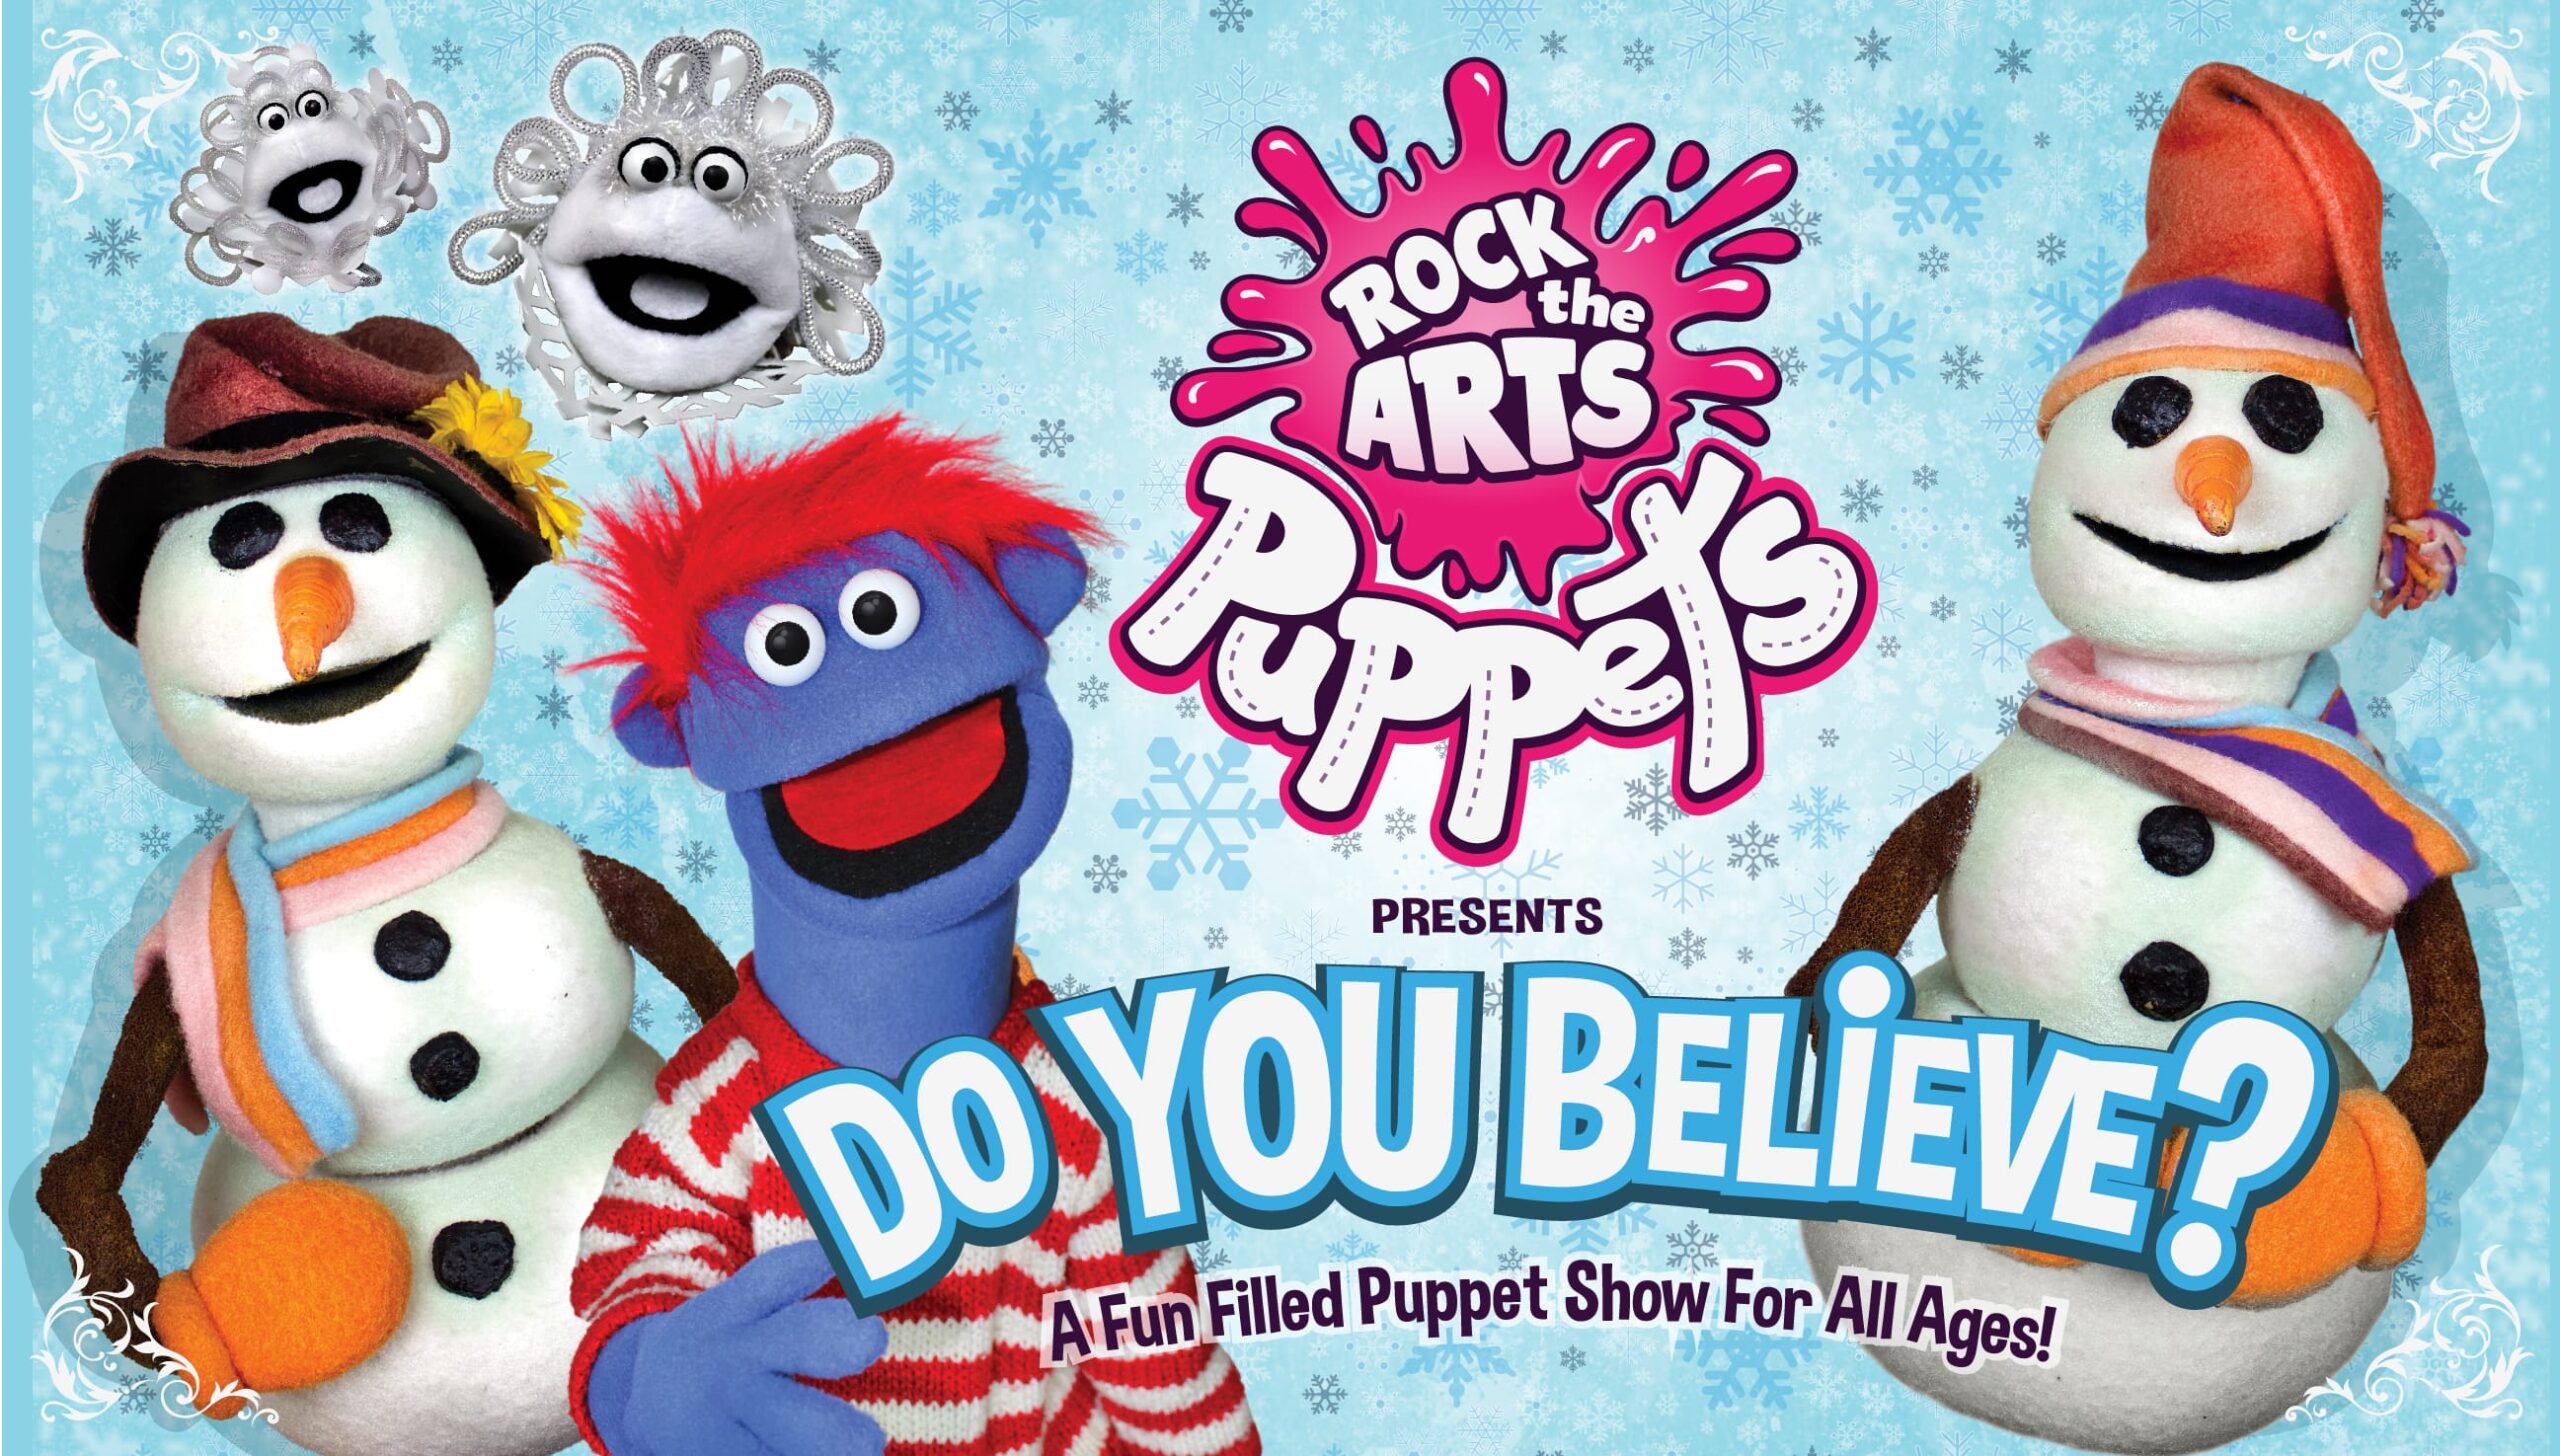 Rock the Arts Puppet Show promotional poster.